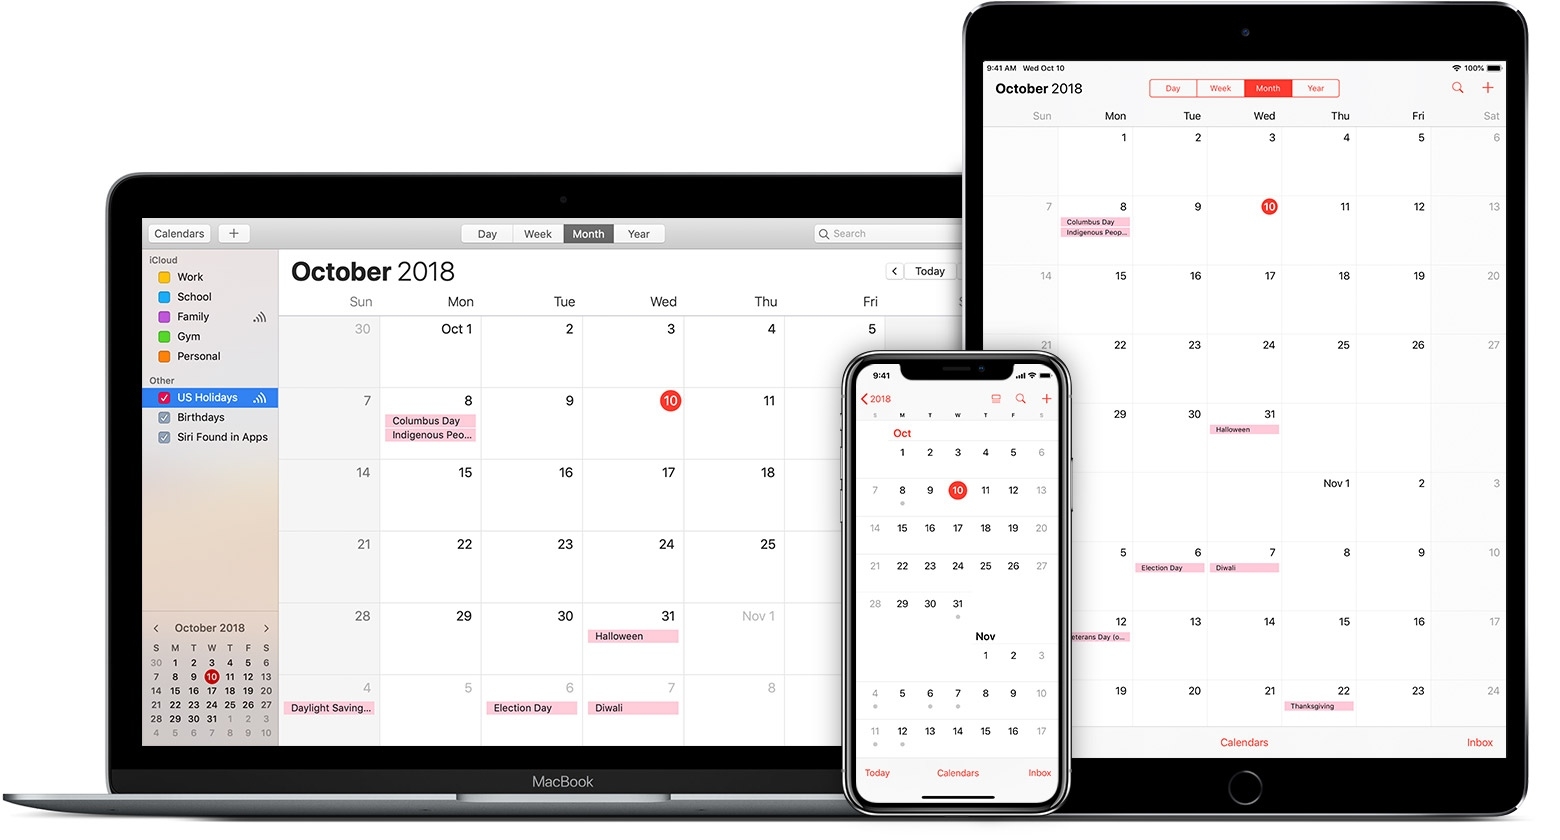 Use Icloud Calendar Subscriptions - Apple Support Subscribe To Us Holidays Calendar In Icloud